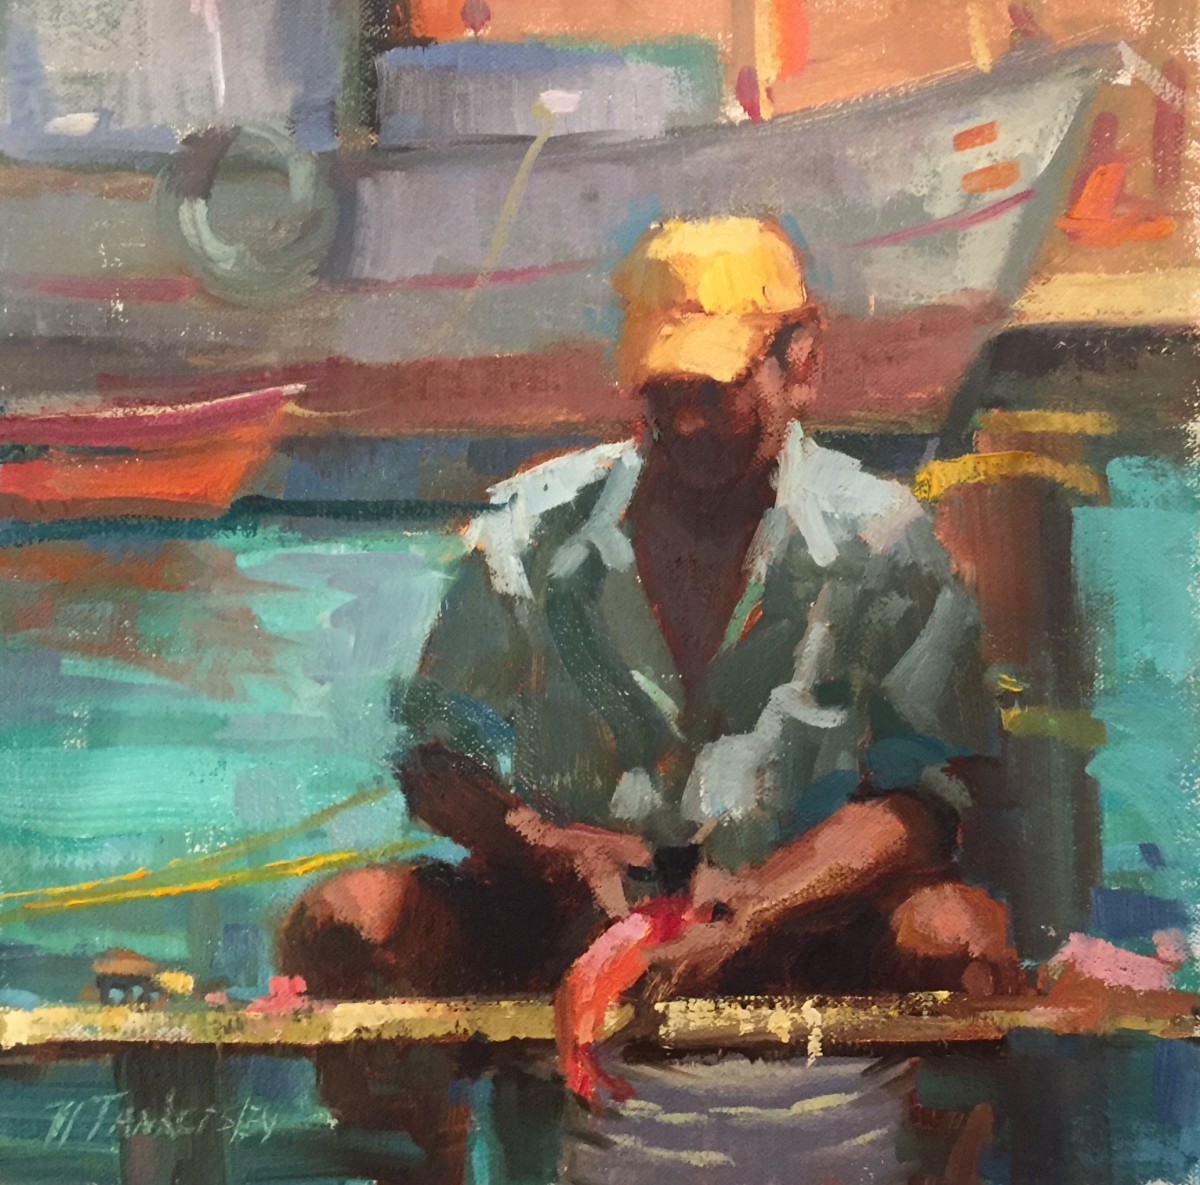 Caribbean Fisherman by Nancy Tankersley  Image: I went to Curacao three times to help start a plein air festival, now a bi-annual 10 day festival for local and international artists. I loved this multi-culture vibrant island, where the colors are vivid, including the fish!